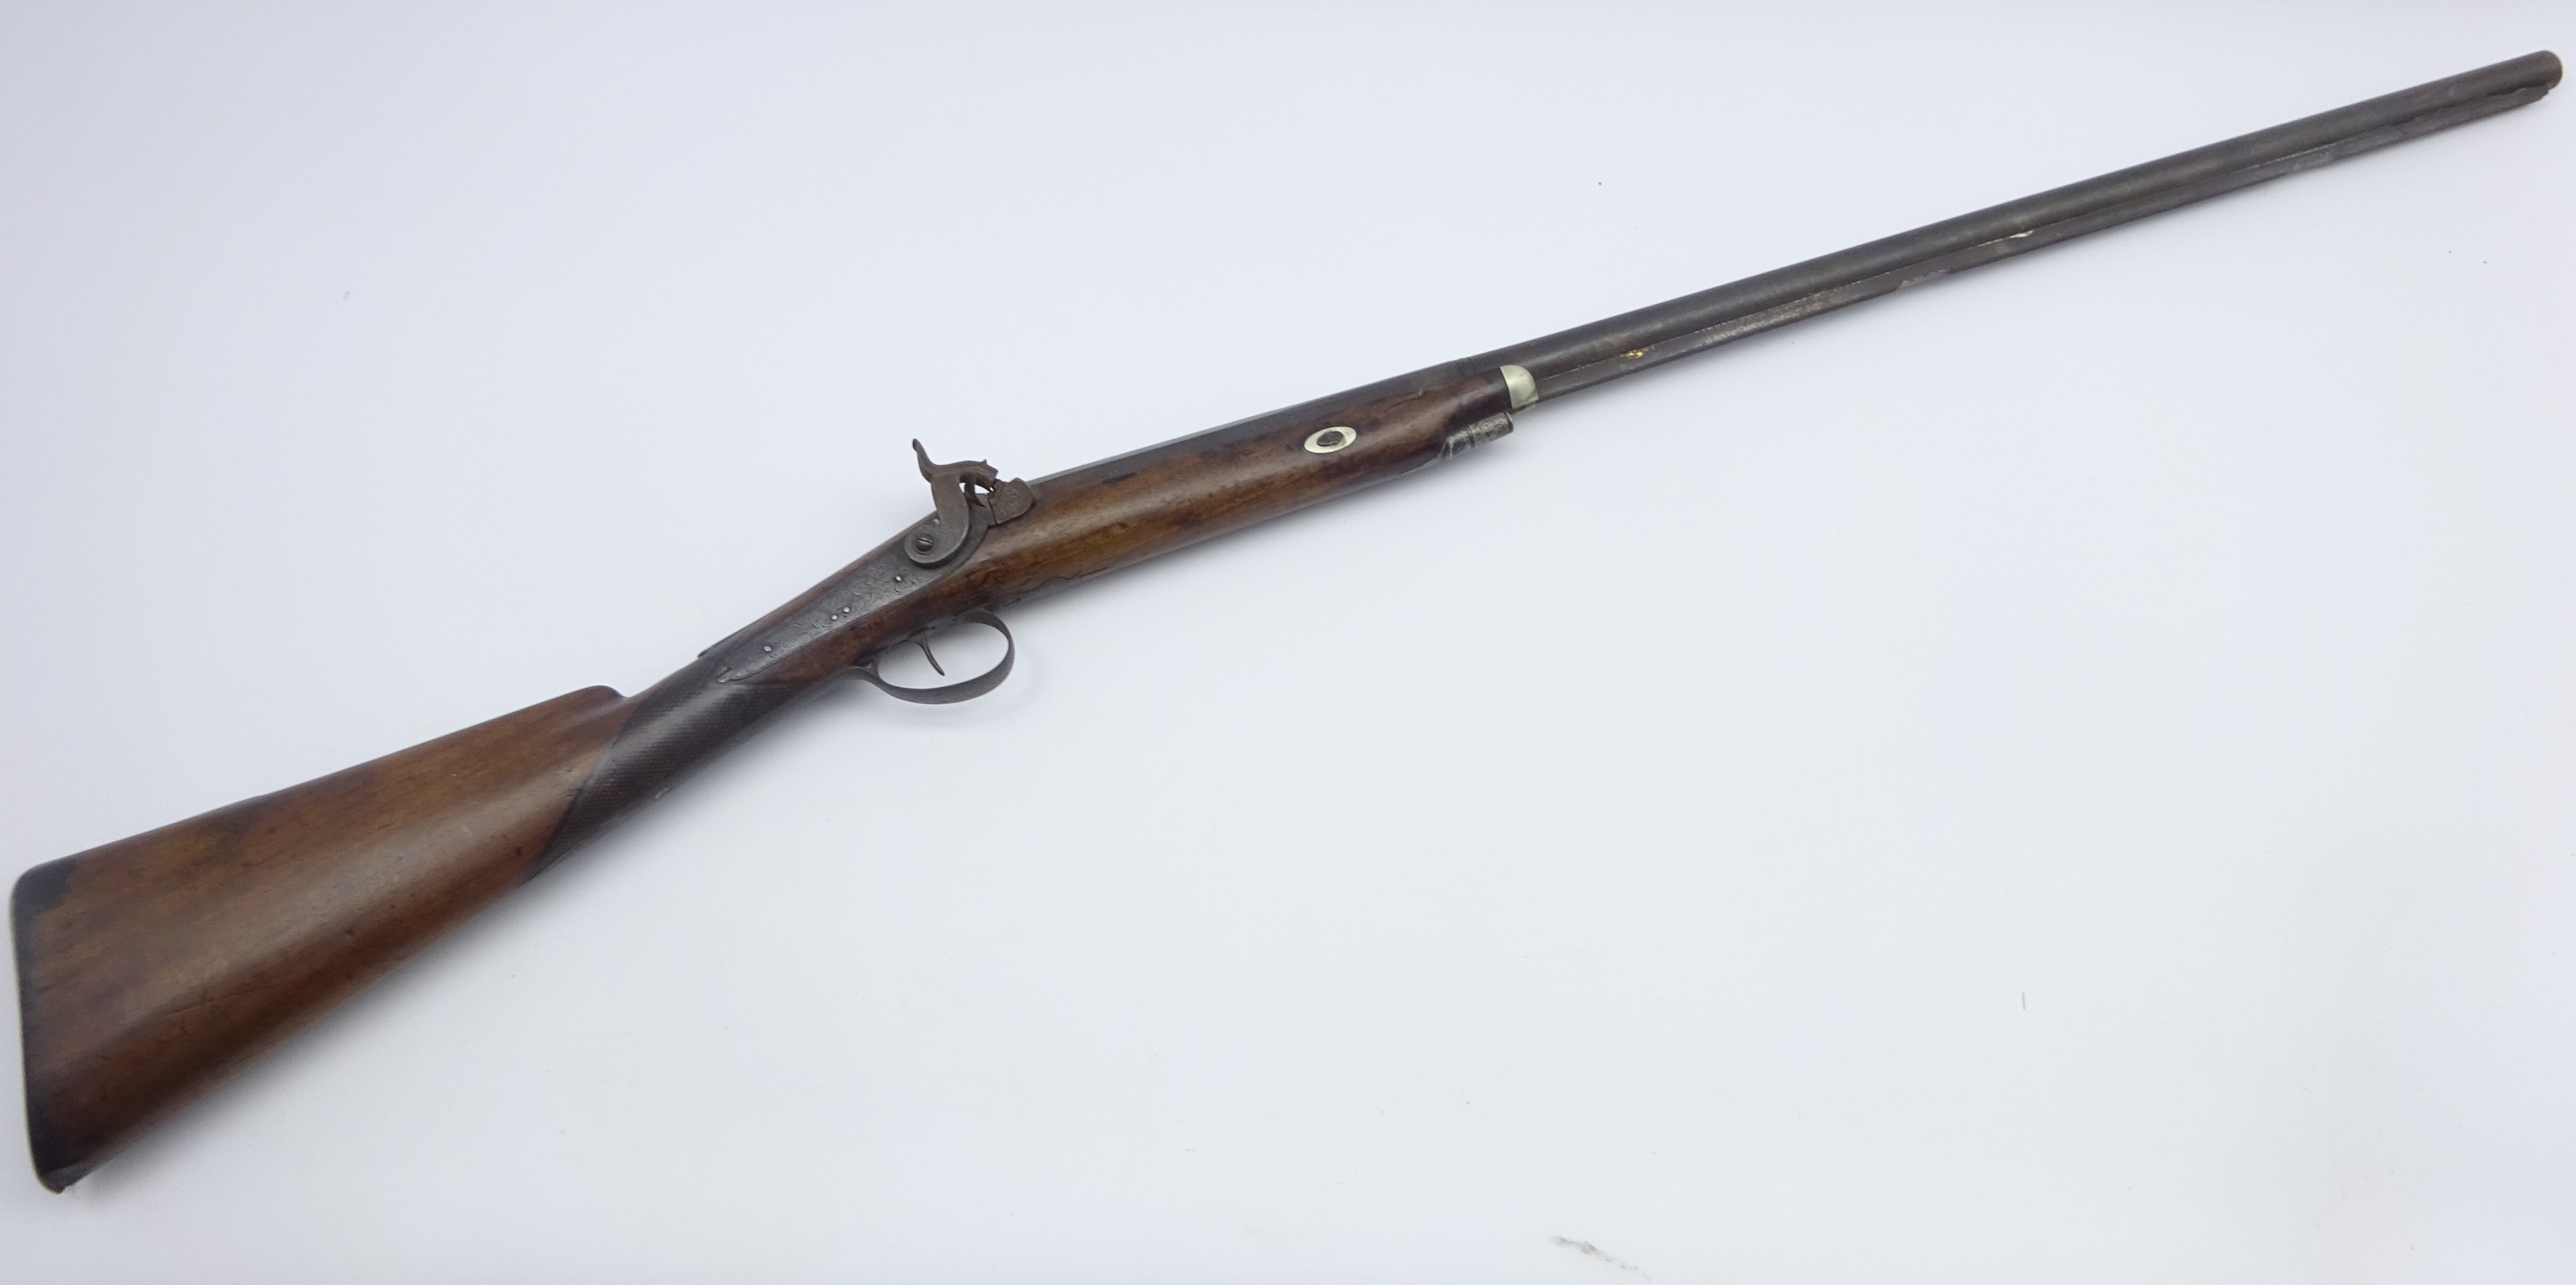 19th century percussion cap muzzle loading gun, the walnut stock with checkered fore-end, - Image 2 of 6